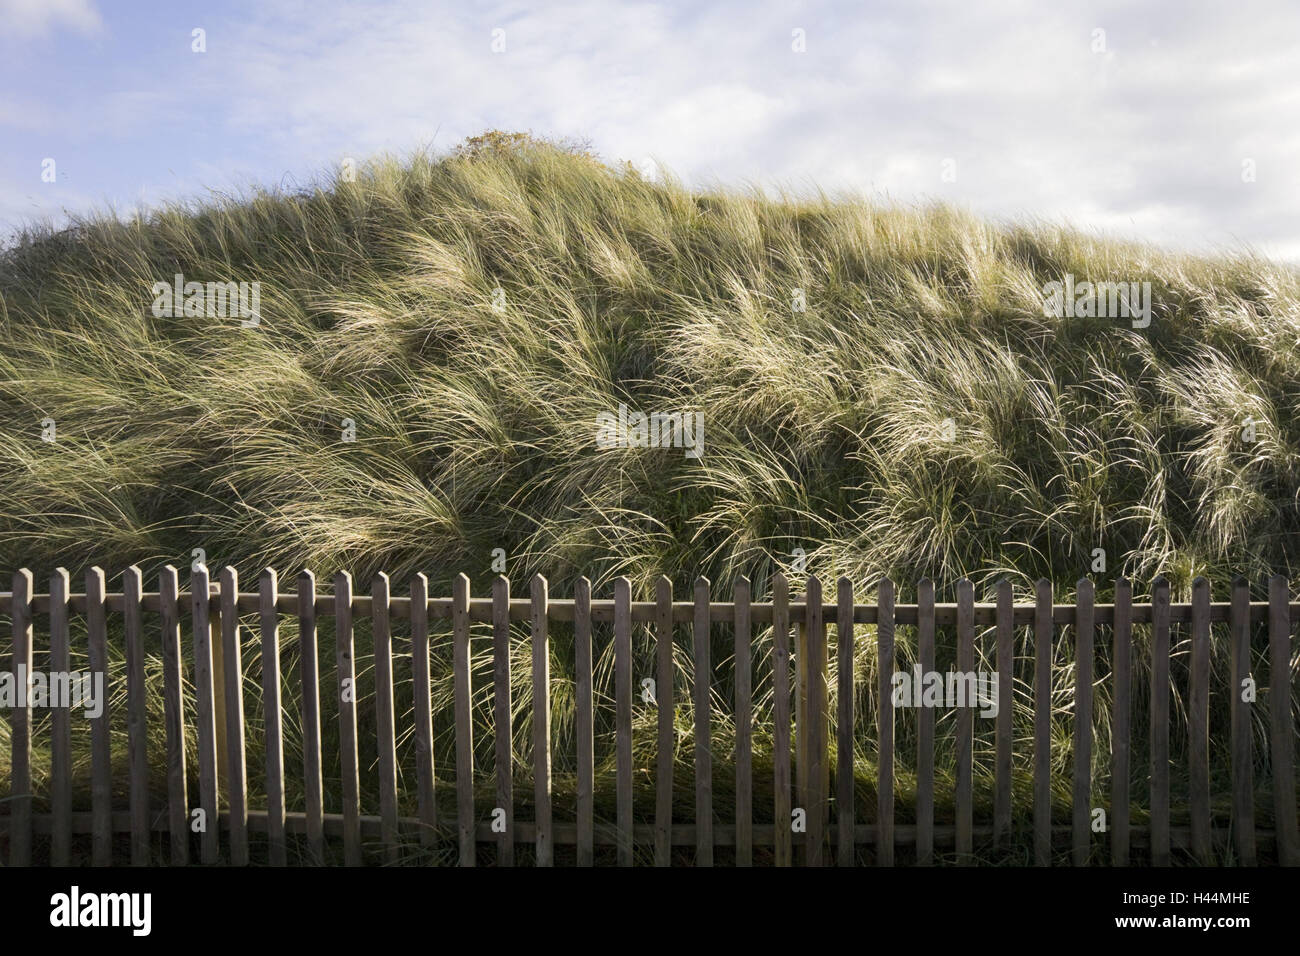 Dune, dune grass, wooden picket fence, Stock Photo